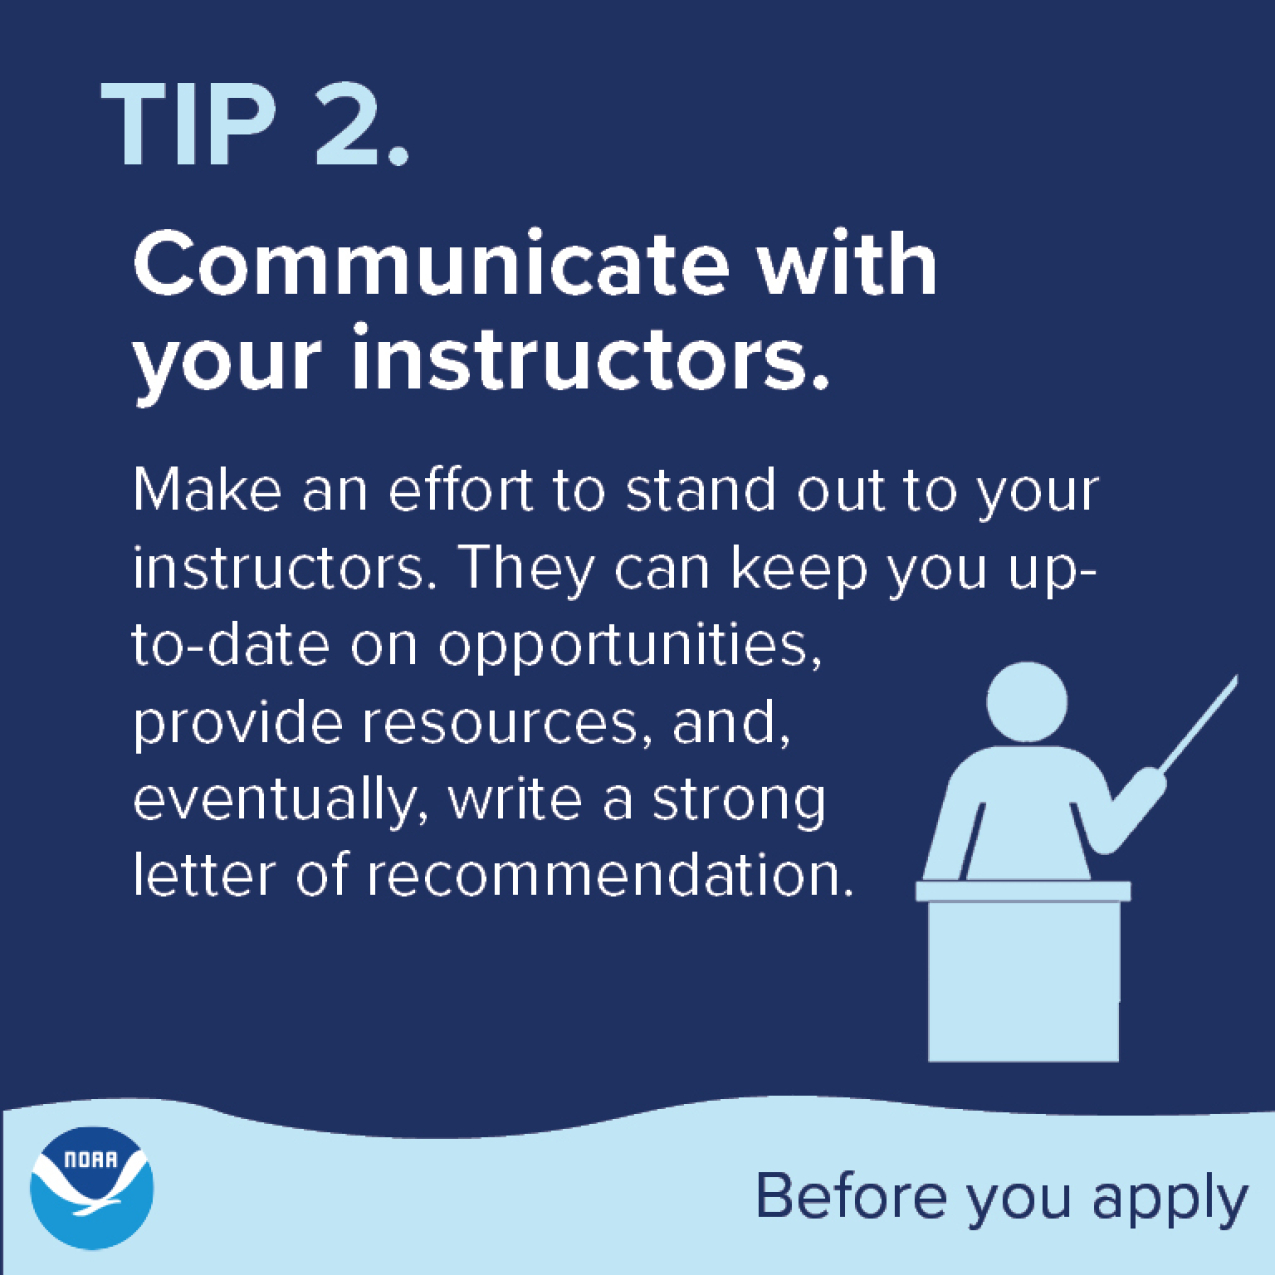 Communicate with your instructors. Make an effort to stand out to your instructors. They can keep you up-to-date on opportunities, provide resources, and, eventually, write a strong letter of recommendation. 